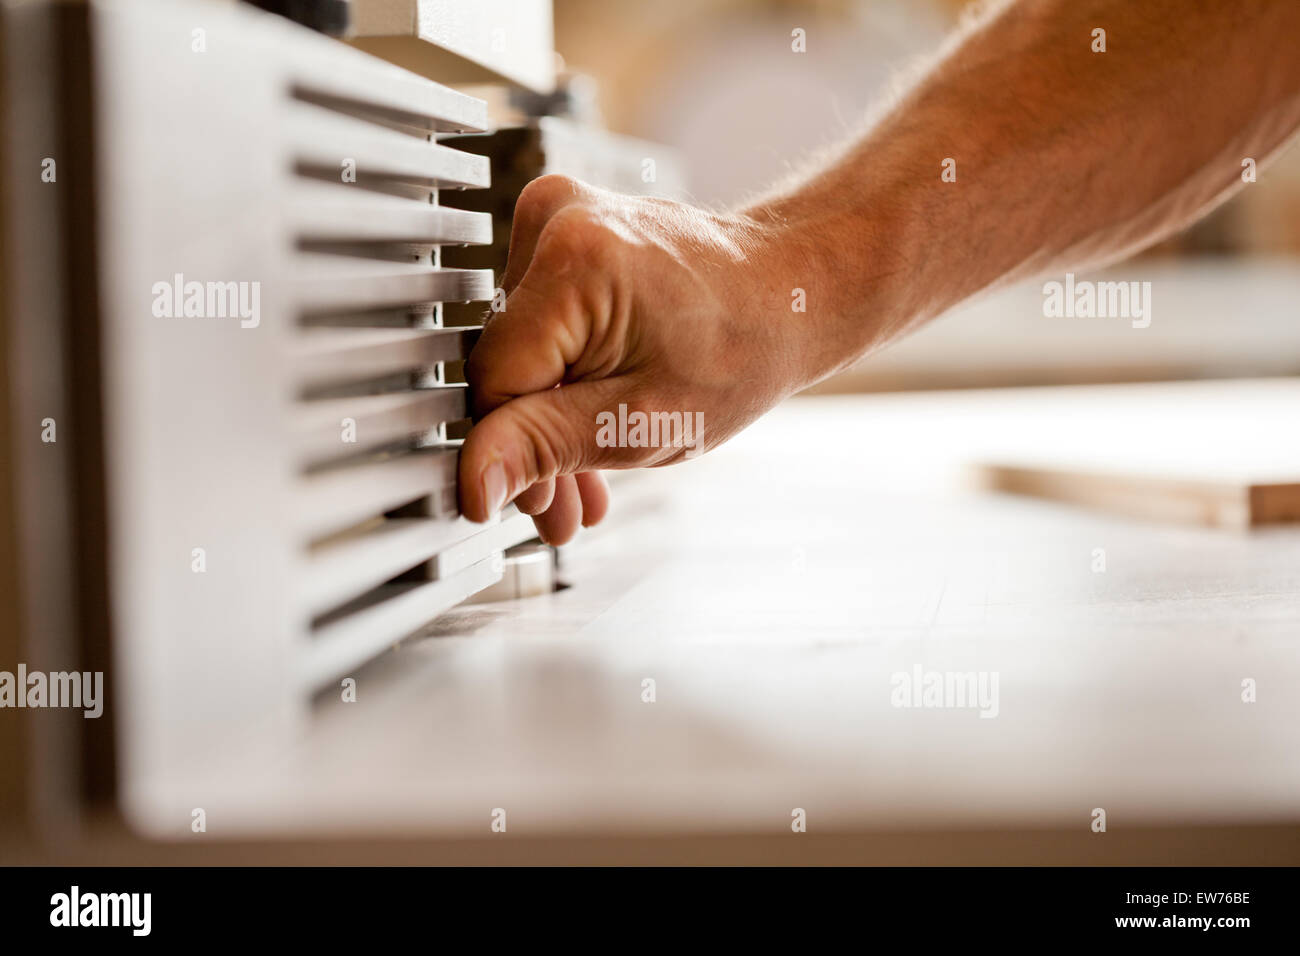 robust hands of a man working on a wood shaper (spindle moulder) in a carpenter workshop, detail of the hand adjusting the machi Stock Photo